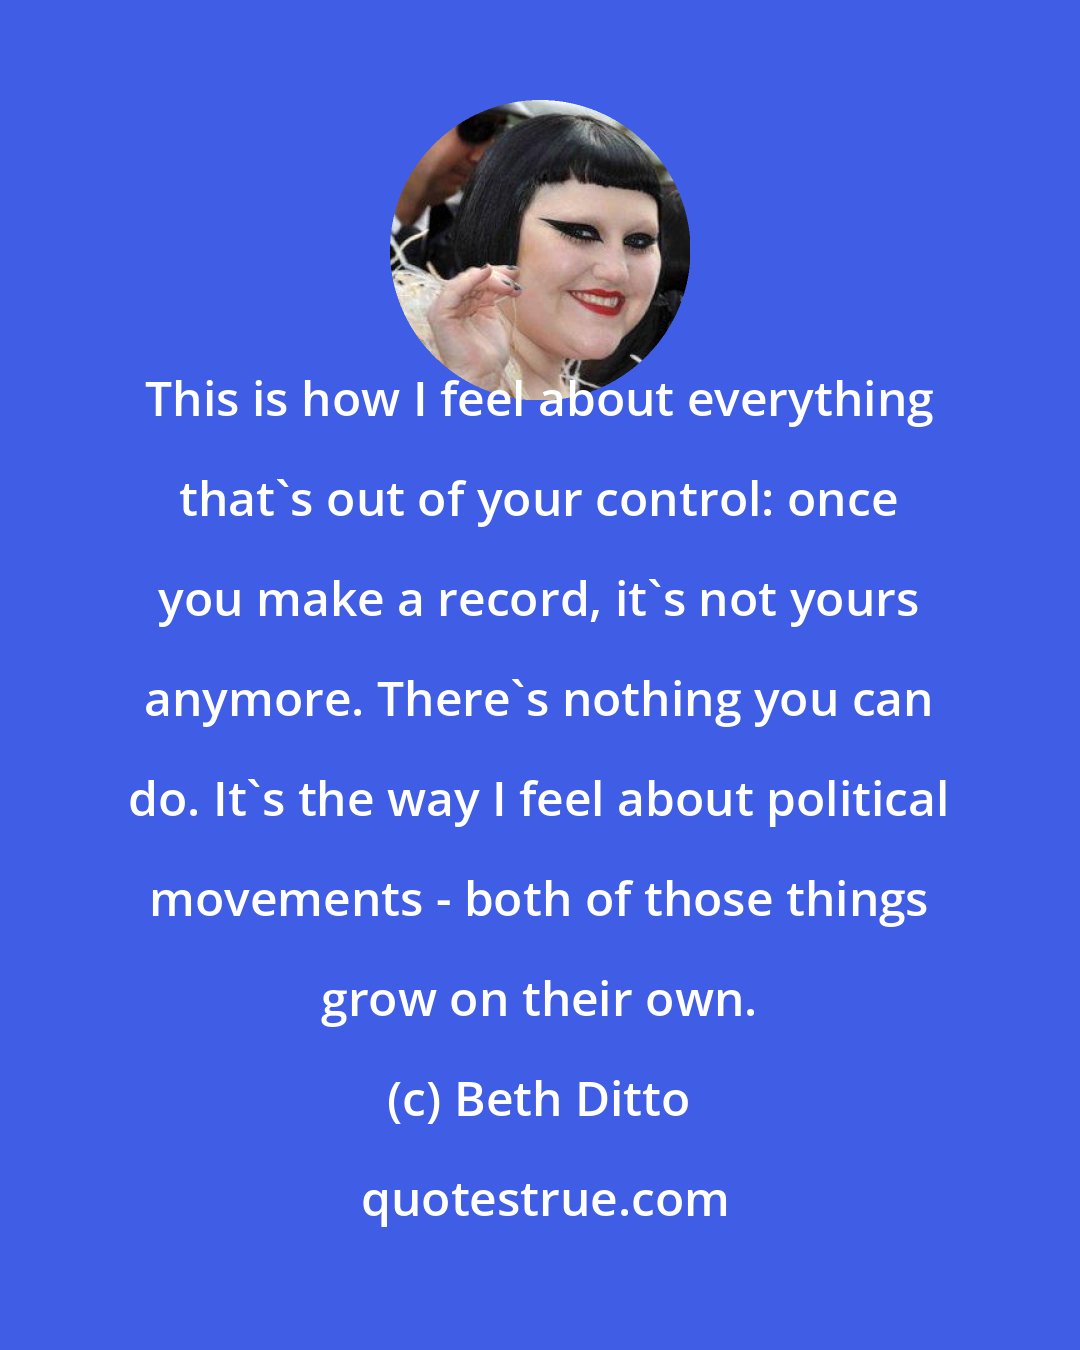 Beth Ditto: This is how I feel about everything that's out of your control: once you make a record, it's not yours anymore. There's nothing you can do. It's the way I feel about political movements - both of those things grow on their own.